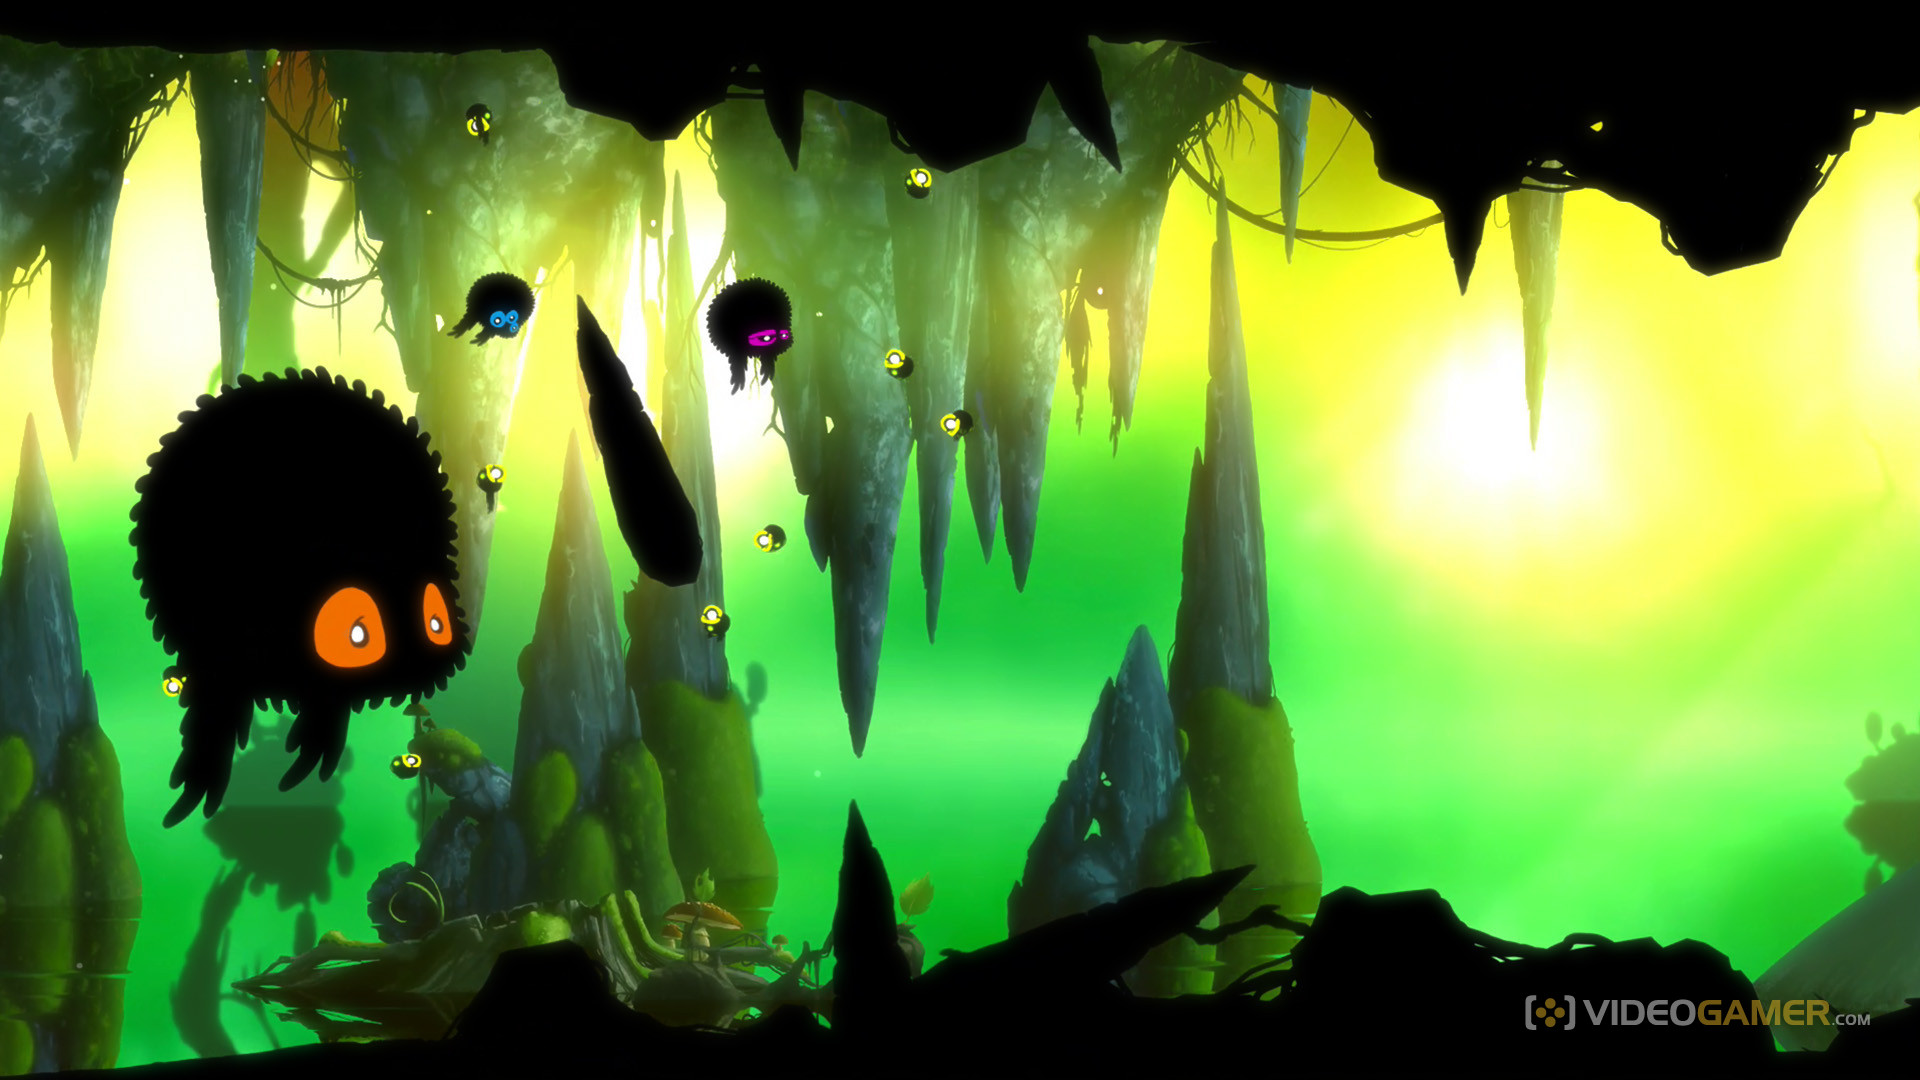 BADLAND: Game Of The Year Edition Pics, Video Game Collection